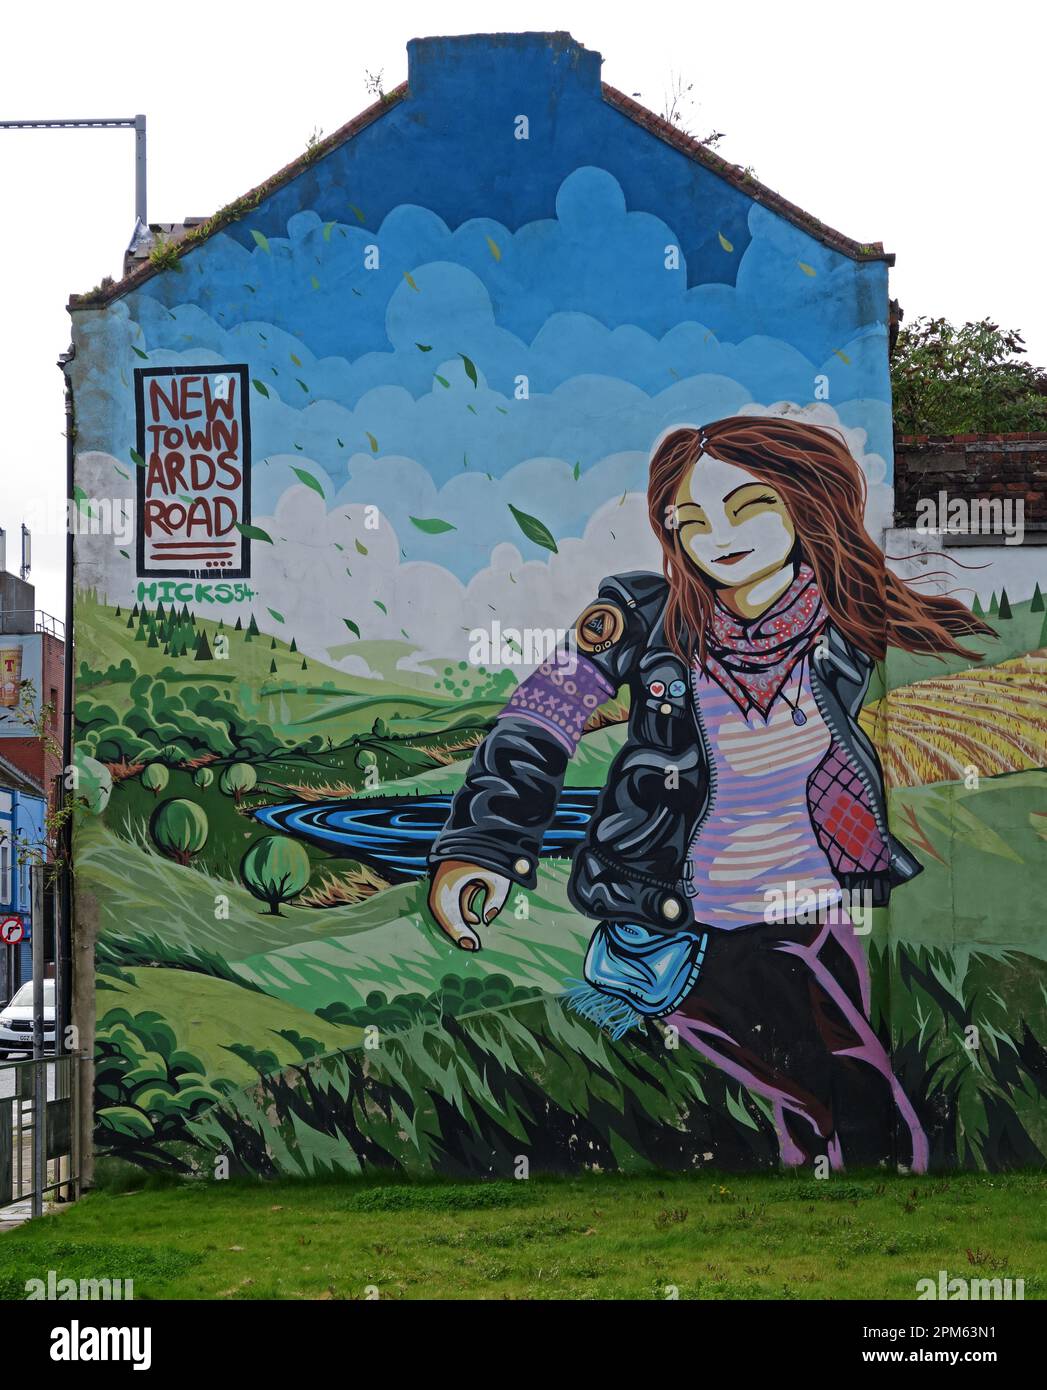 Newtownards road, country girl mural, protestant/unionist section of 919 Upper Newtownards Rd, Dundonald, Belfast , NI, UK, BT16 1RQ Stock Photo